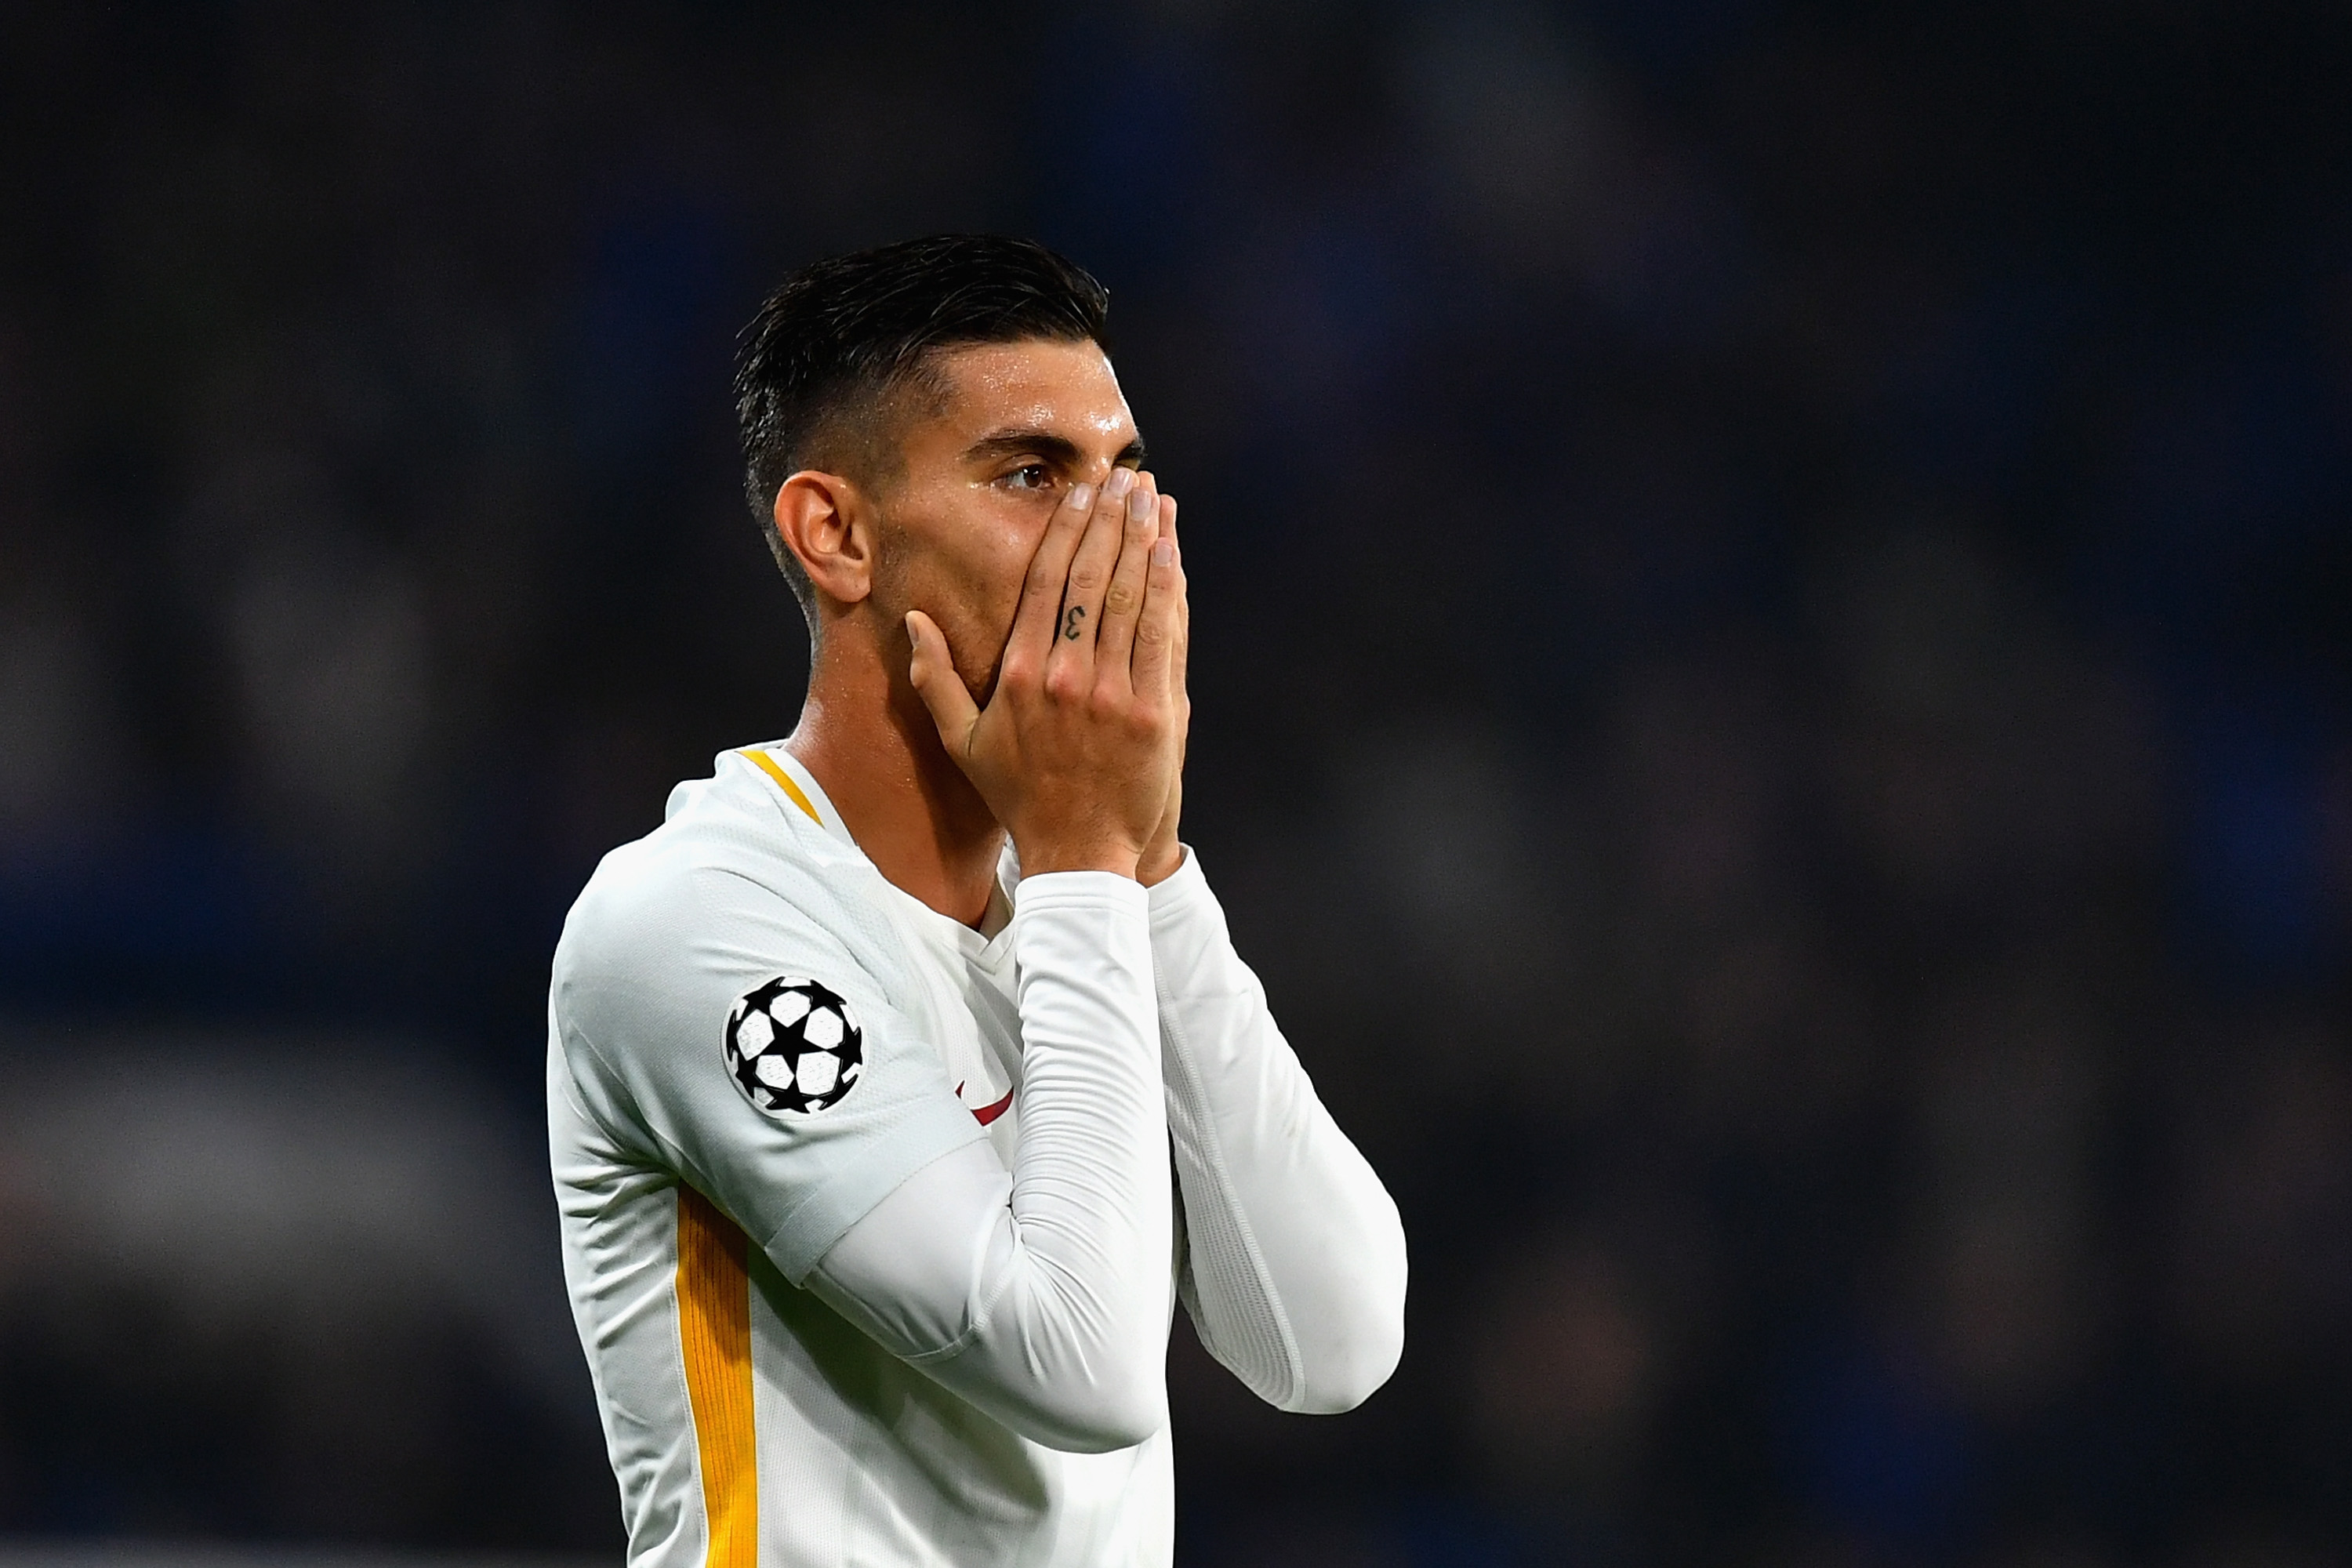 LONDON, ENGLAND - OCTOBER 18:  Lorenzo Pellegrini of AS Roma reacts after the full time whistle during the UEFA Champions League group C match between Chelsea FC and AS Roma at Stamford Bridge on October 18, 2017 in London, United Kingdom.  (Photo by Dan Mullan/Getty Images)